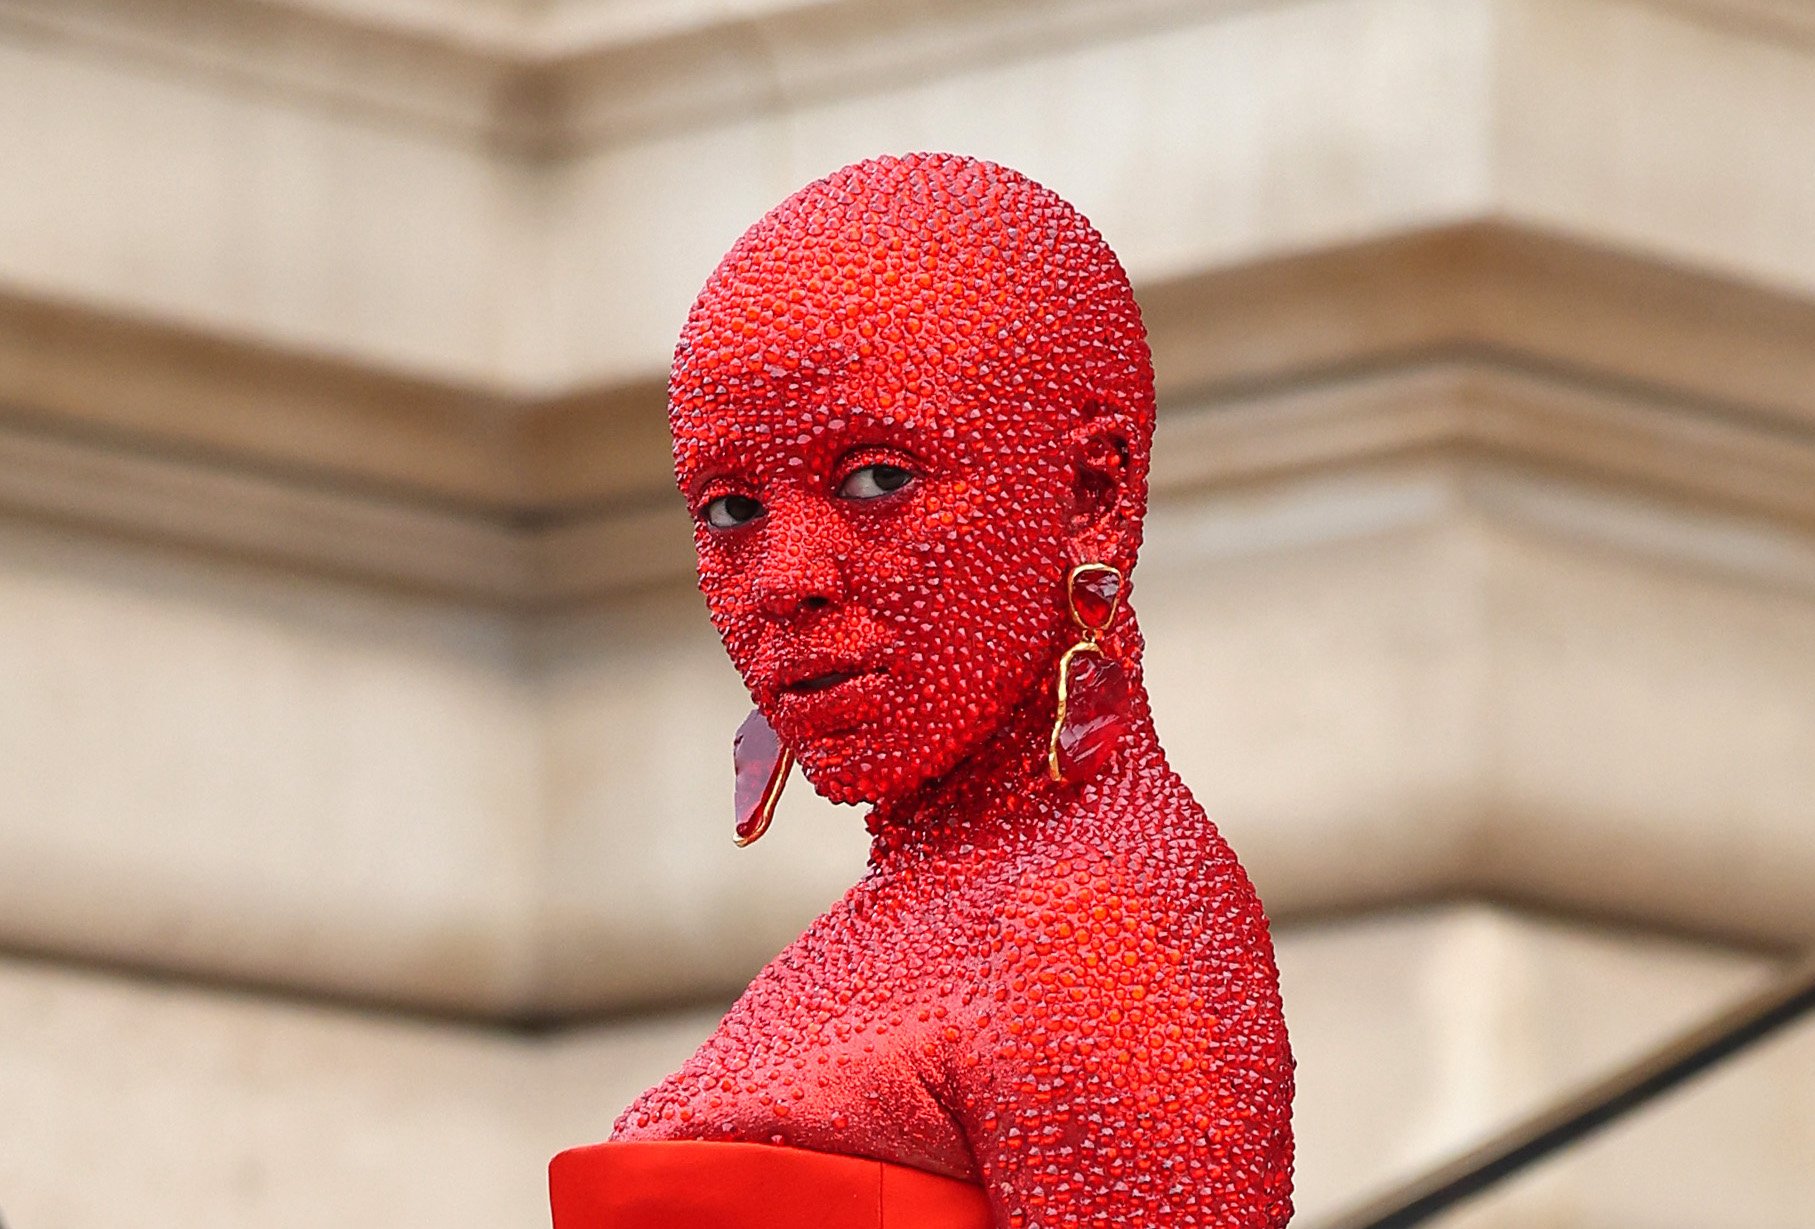 Doja Cat in a red crystallized look